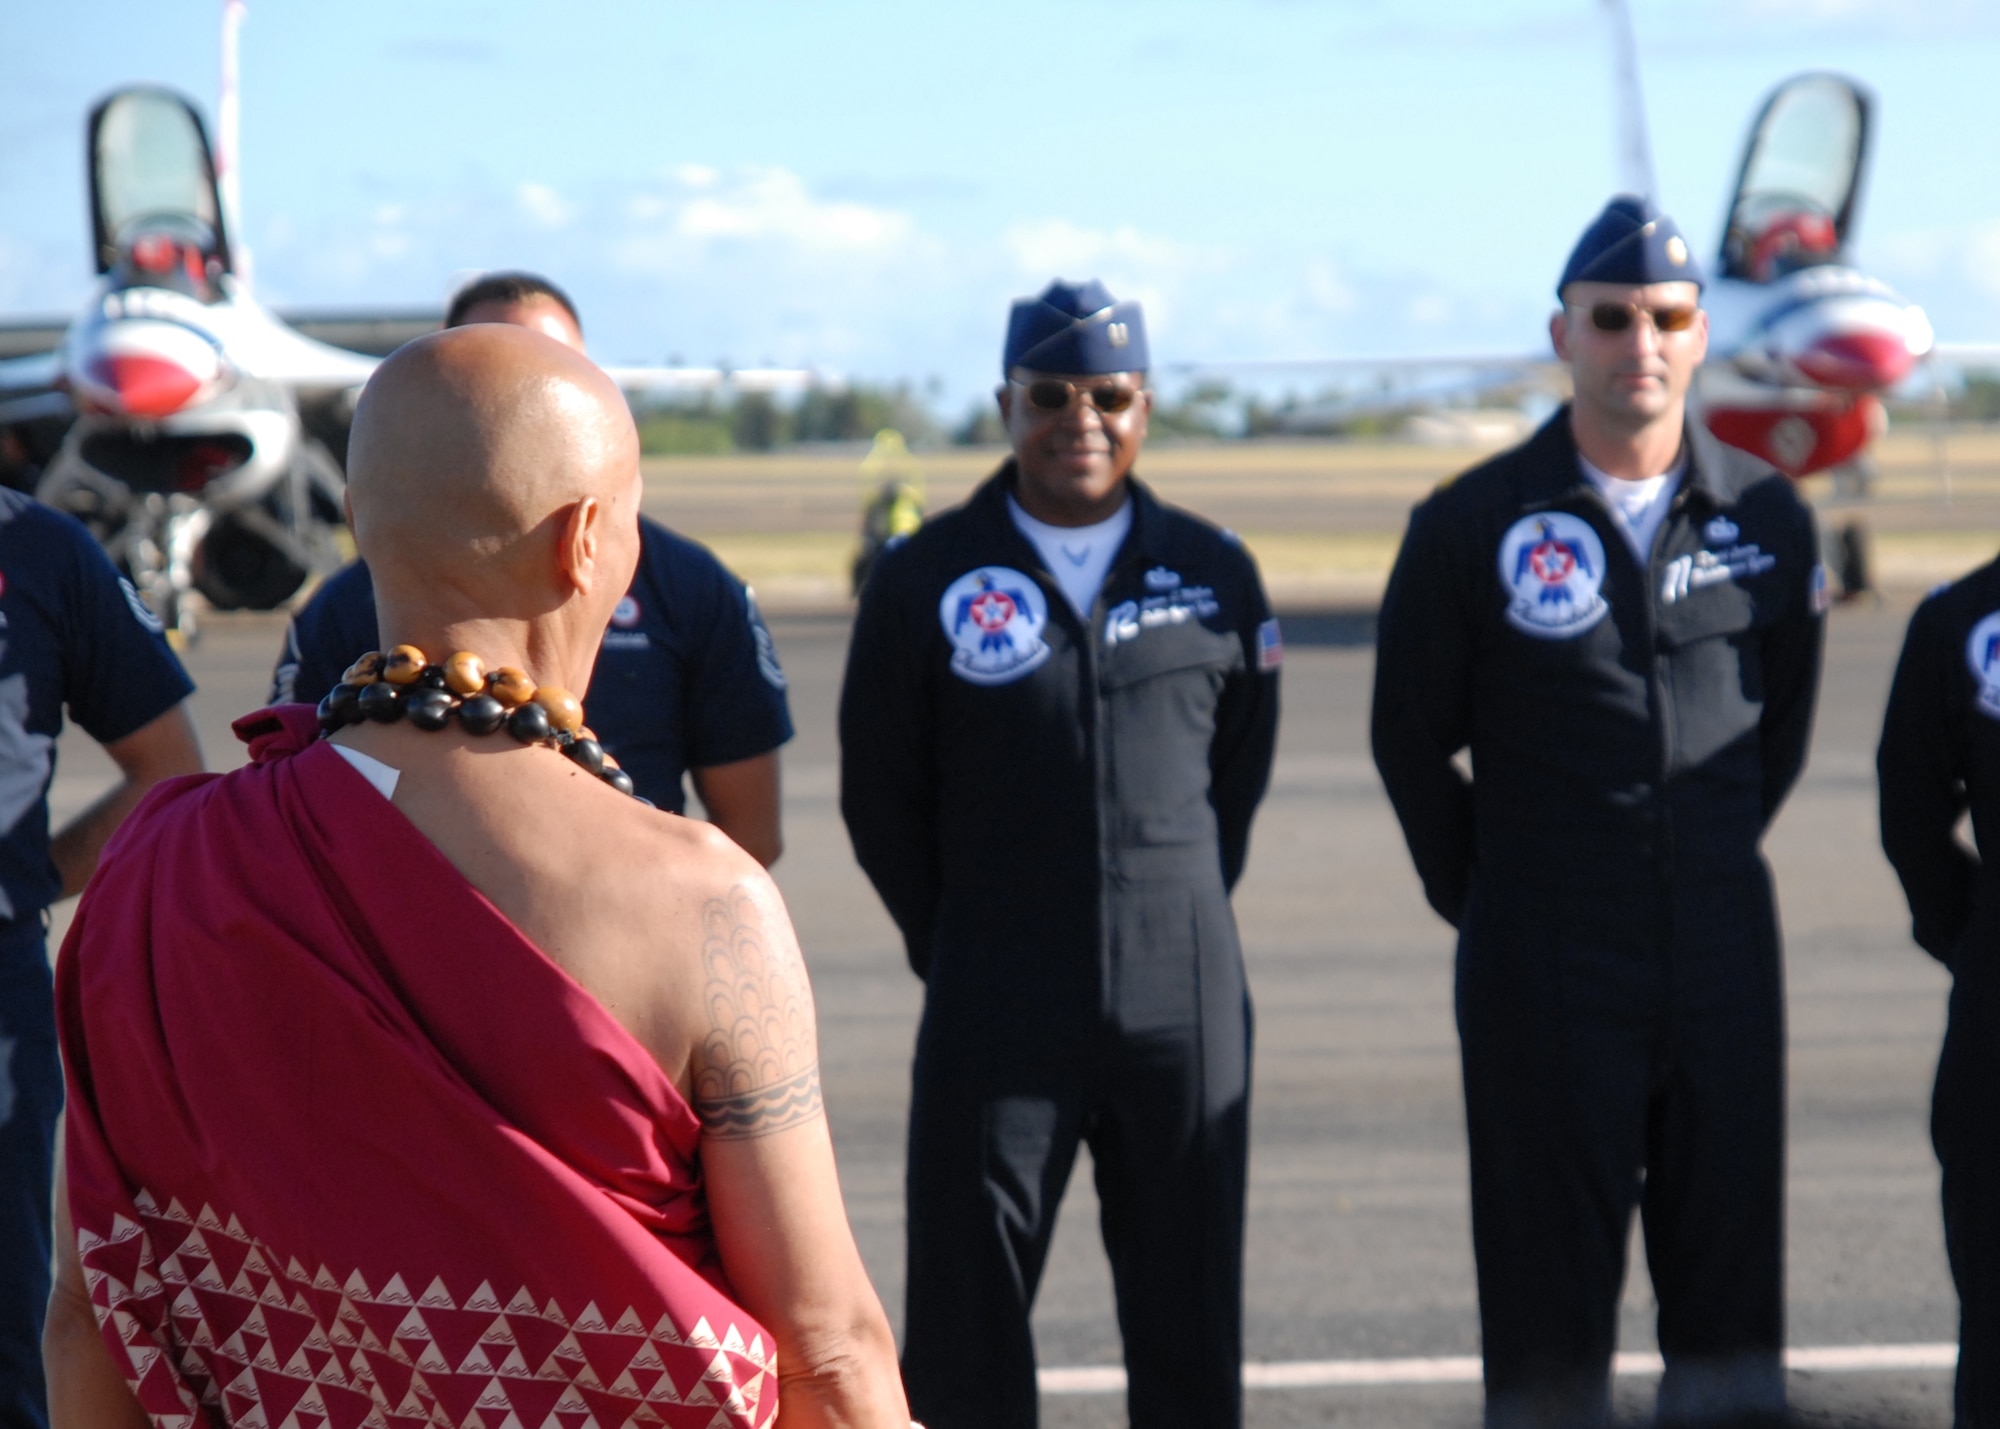 HICKAM AIR FORCE BASE, Hawaii -- Ble Haku Raymond Ganotise, a Hawaiian reverend, sings a traditional oli, or blessing, to the U.S Air Force Thunderbirds Sept. 16 here. He blew on a pu, or conch shell, to traditionally announce their arrival before the blessing.  Ble Haku Ganotise is a retired Hawaii National Guard master sergeant. In Hawaiian the culture, the pu is used to announce the opening of the Hawaii State Legislature, presentation of the royal court at hula festivals and for traditional ceremonies. The pu is also a popular commencement tool at weddings and luaus, and also have been used to honor royalty and famous people. (U.S. Air Force photo/Staff Sgt. Mike Meares)